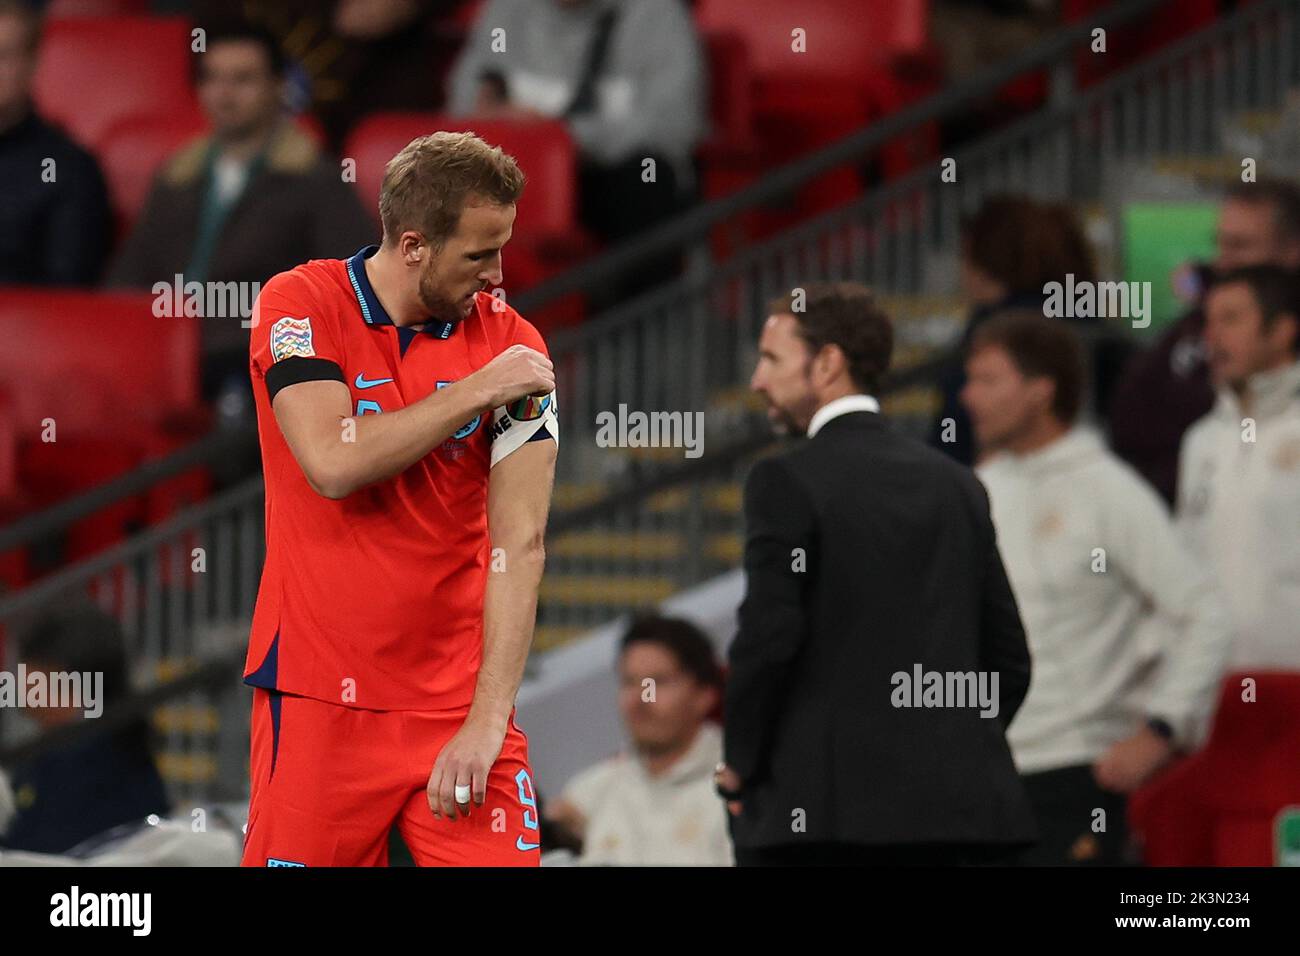 London, UK. 26th Sep, 2022. Harry Kane of England & Gareth Southgate, the manager of England look on. England v Germany, UEFA Nations league International group C match at Wembley Stadium in London on Monday 26th September 2022. Editorial use only. pic by Andrew Orchard/Andrew Orchard sports photography/Alamy Live News Credit: Andrew Orchard sports photography/Alamy Live News Stock Photo